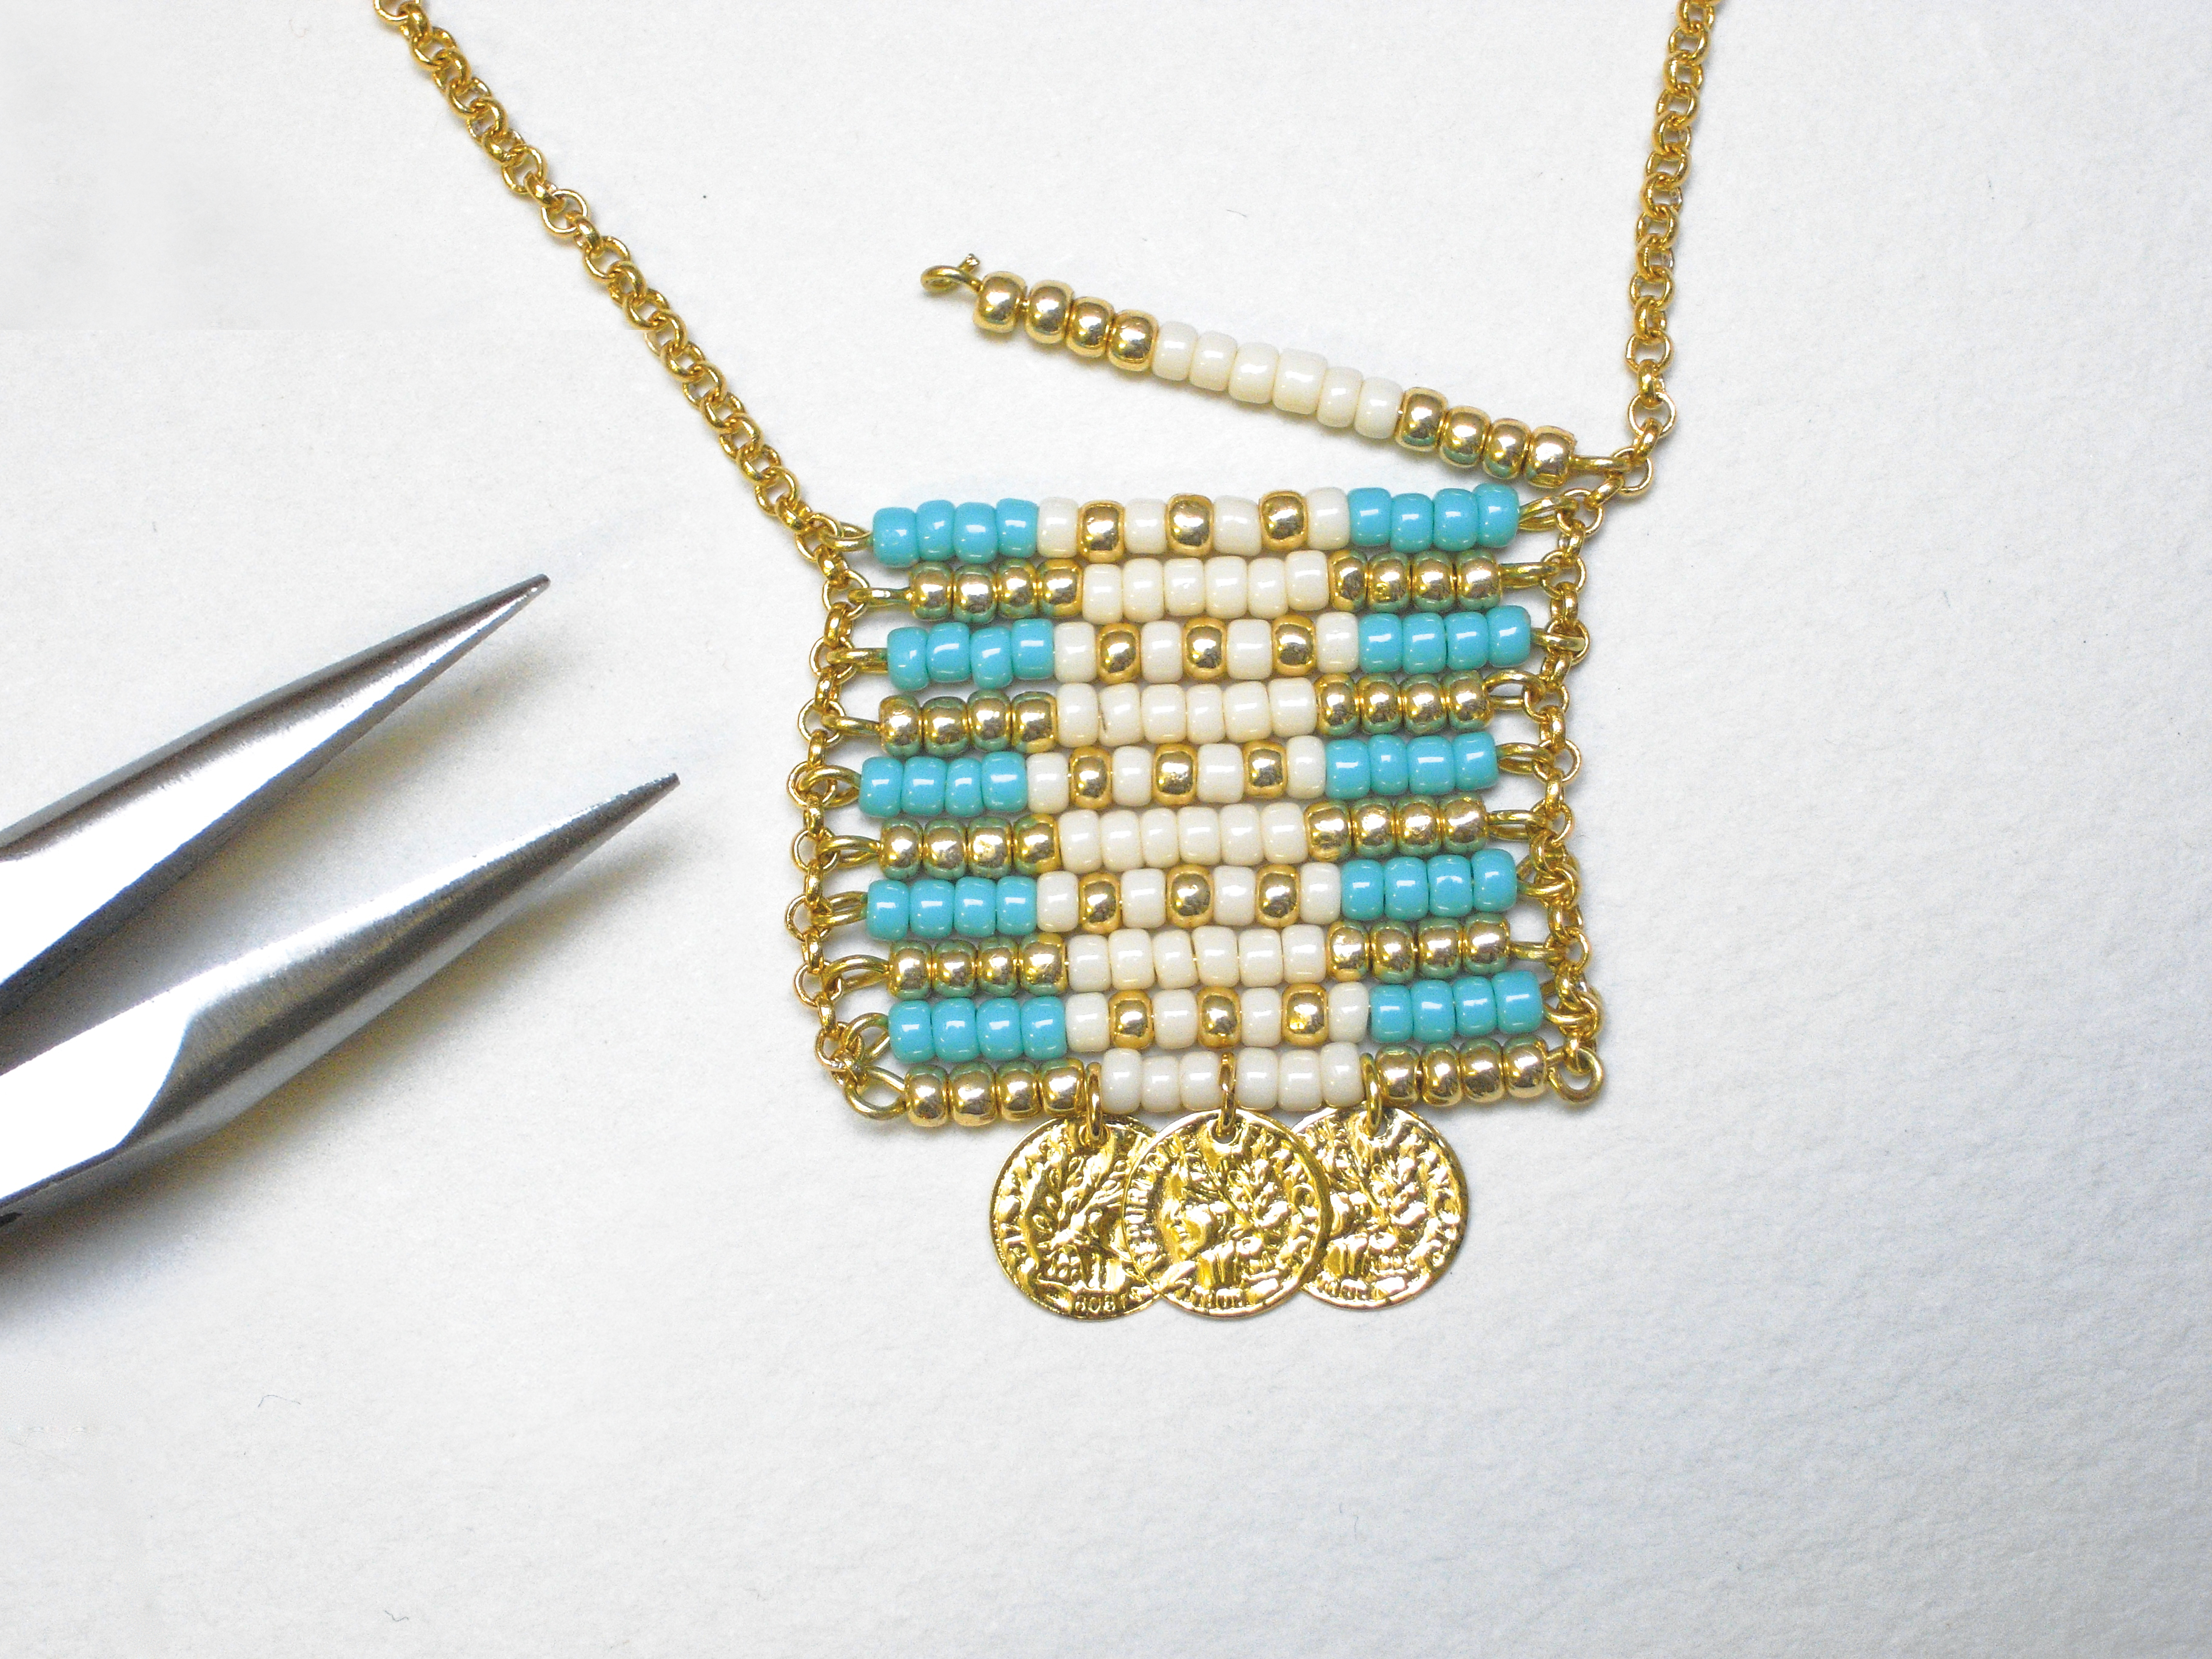 How to make a seed bead necklace